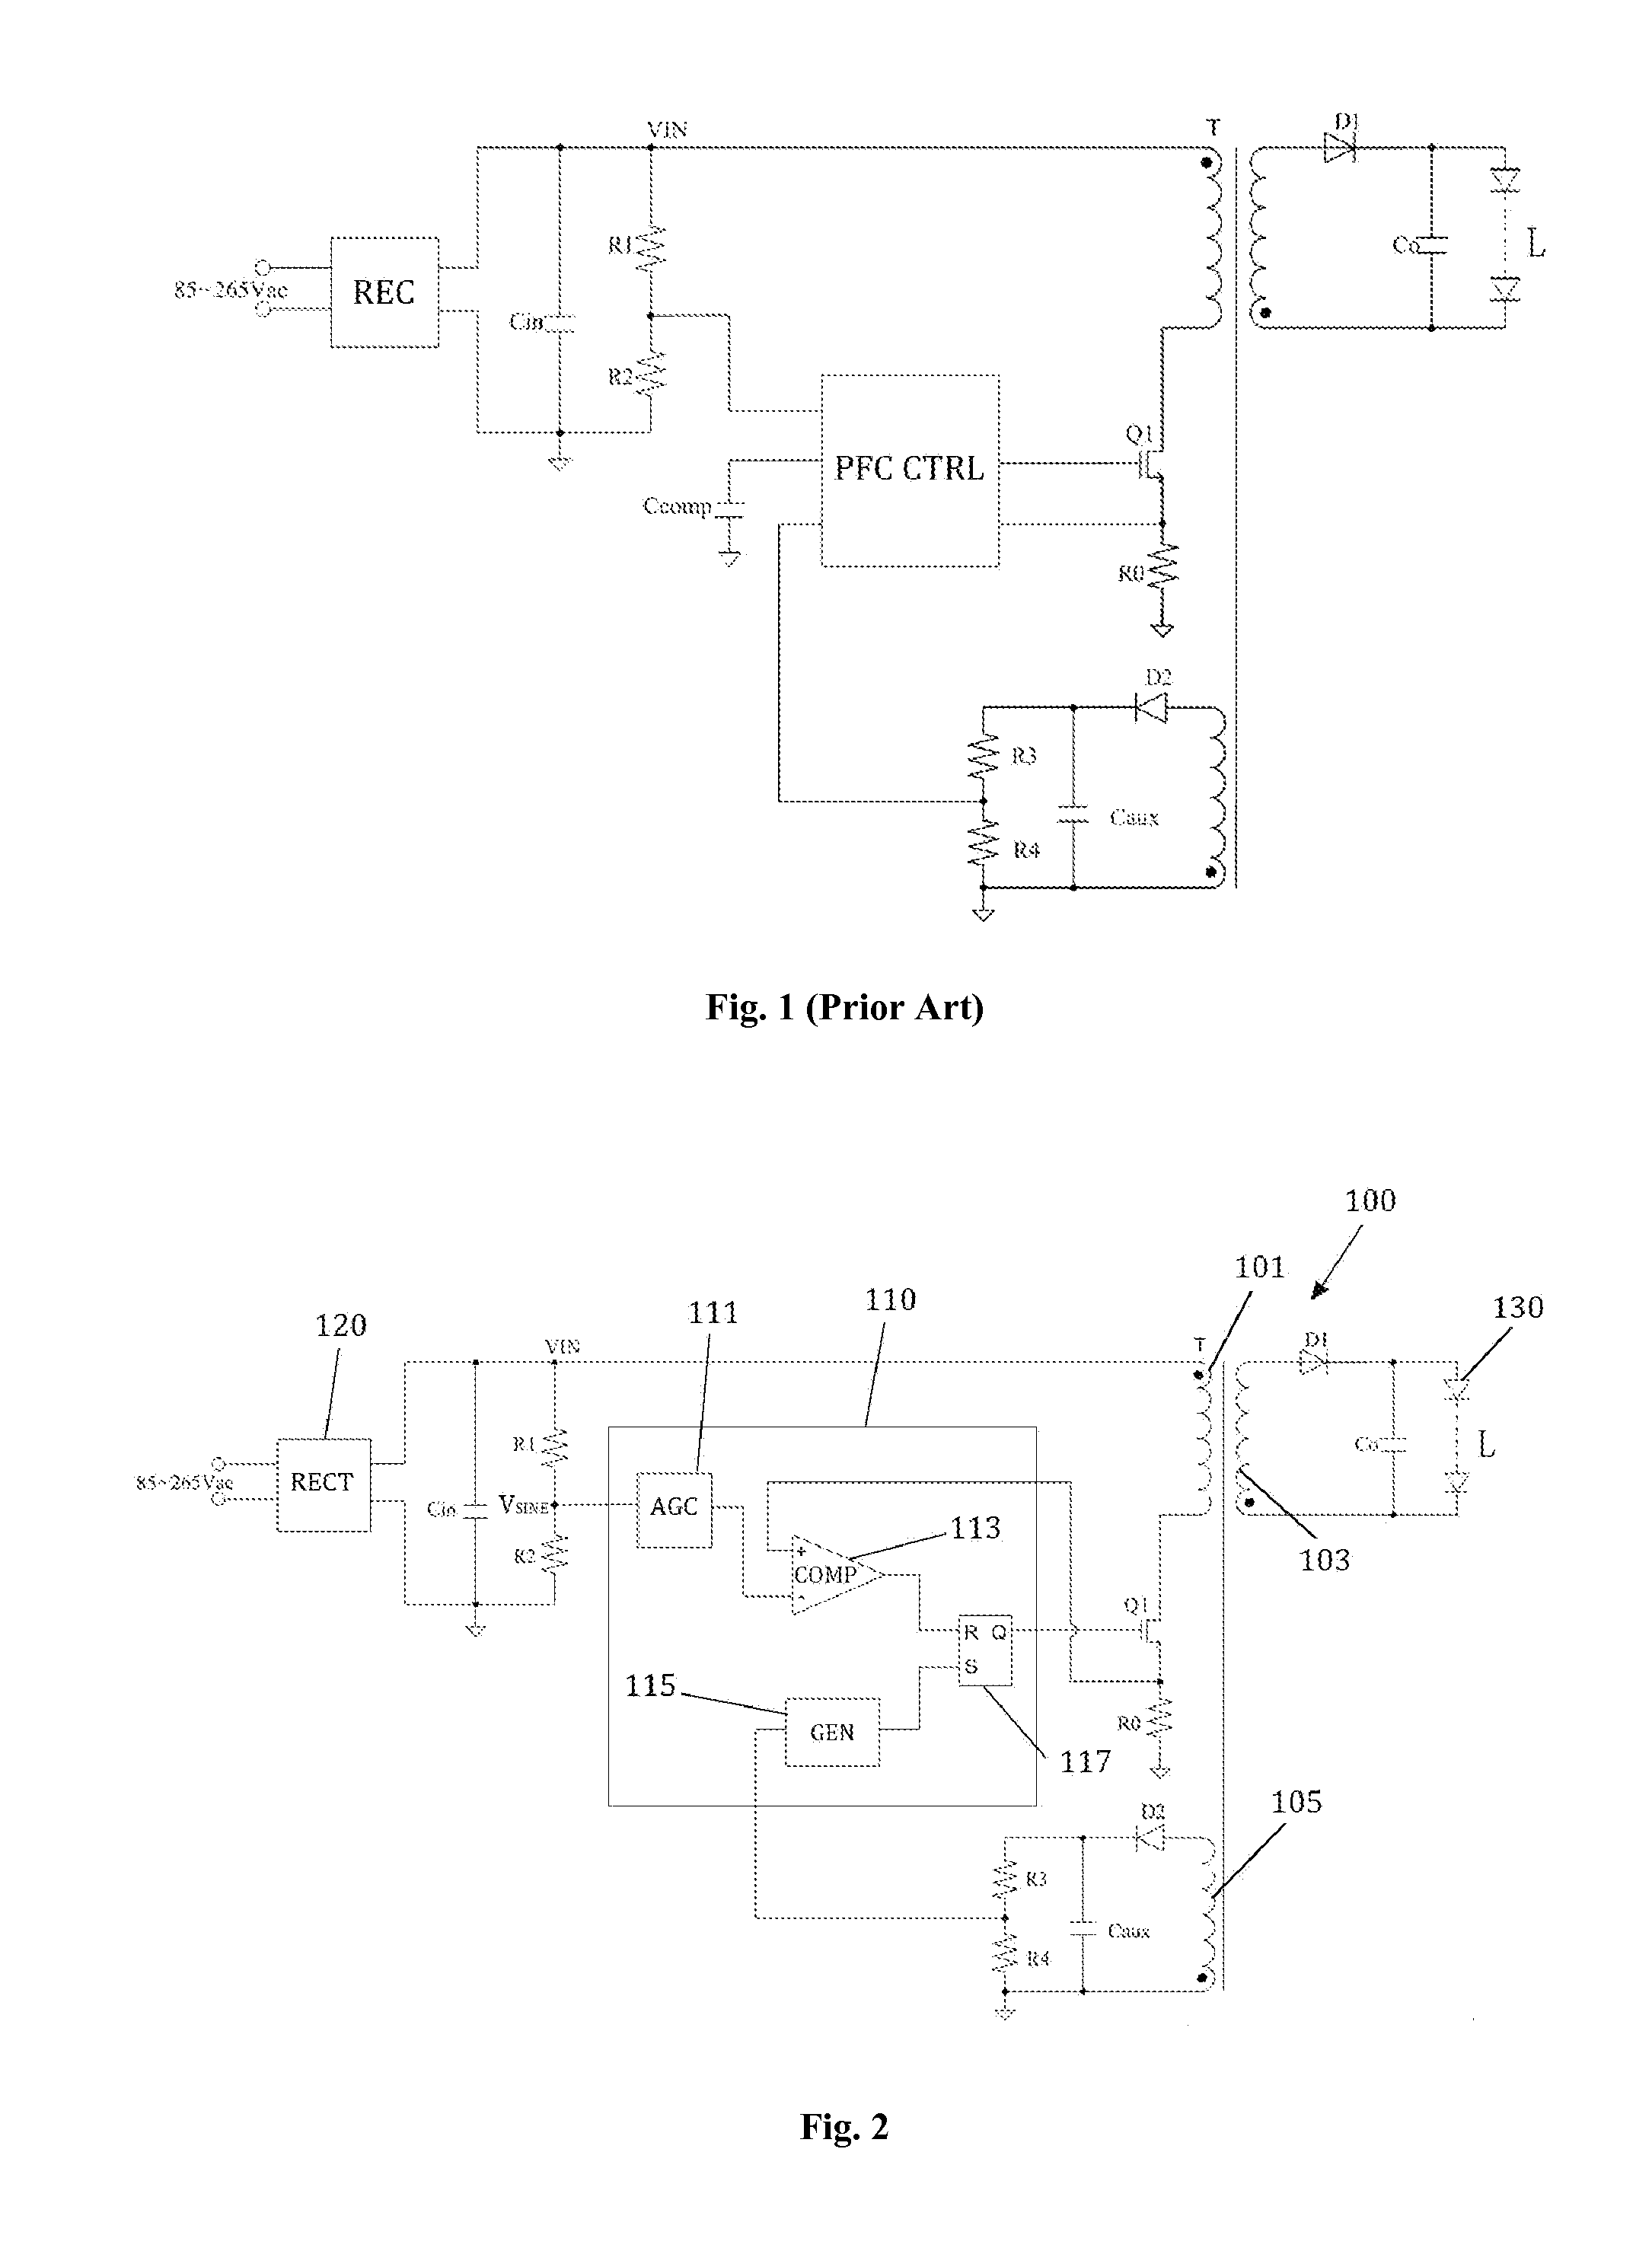 Control device for use with switching converters